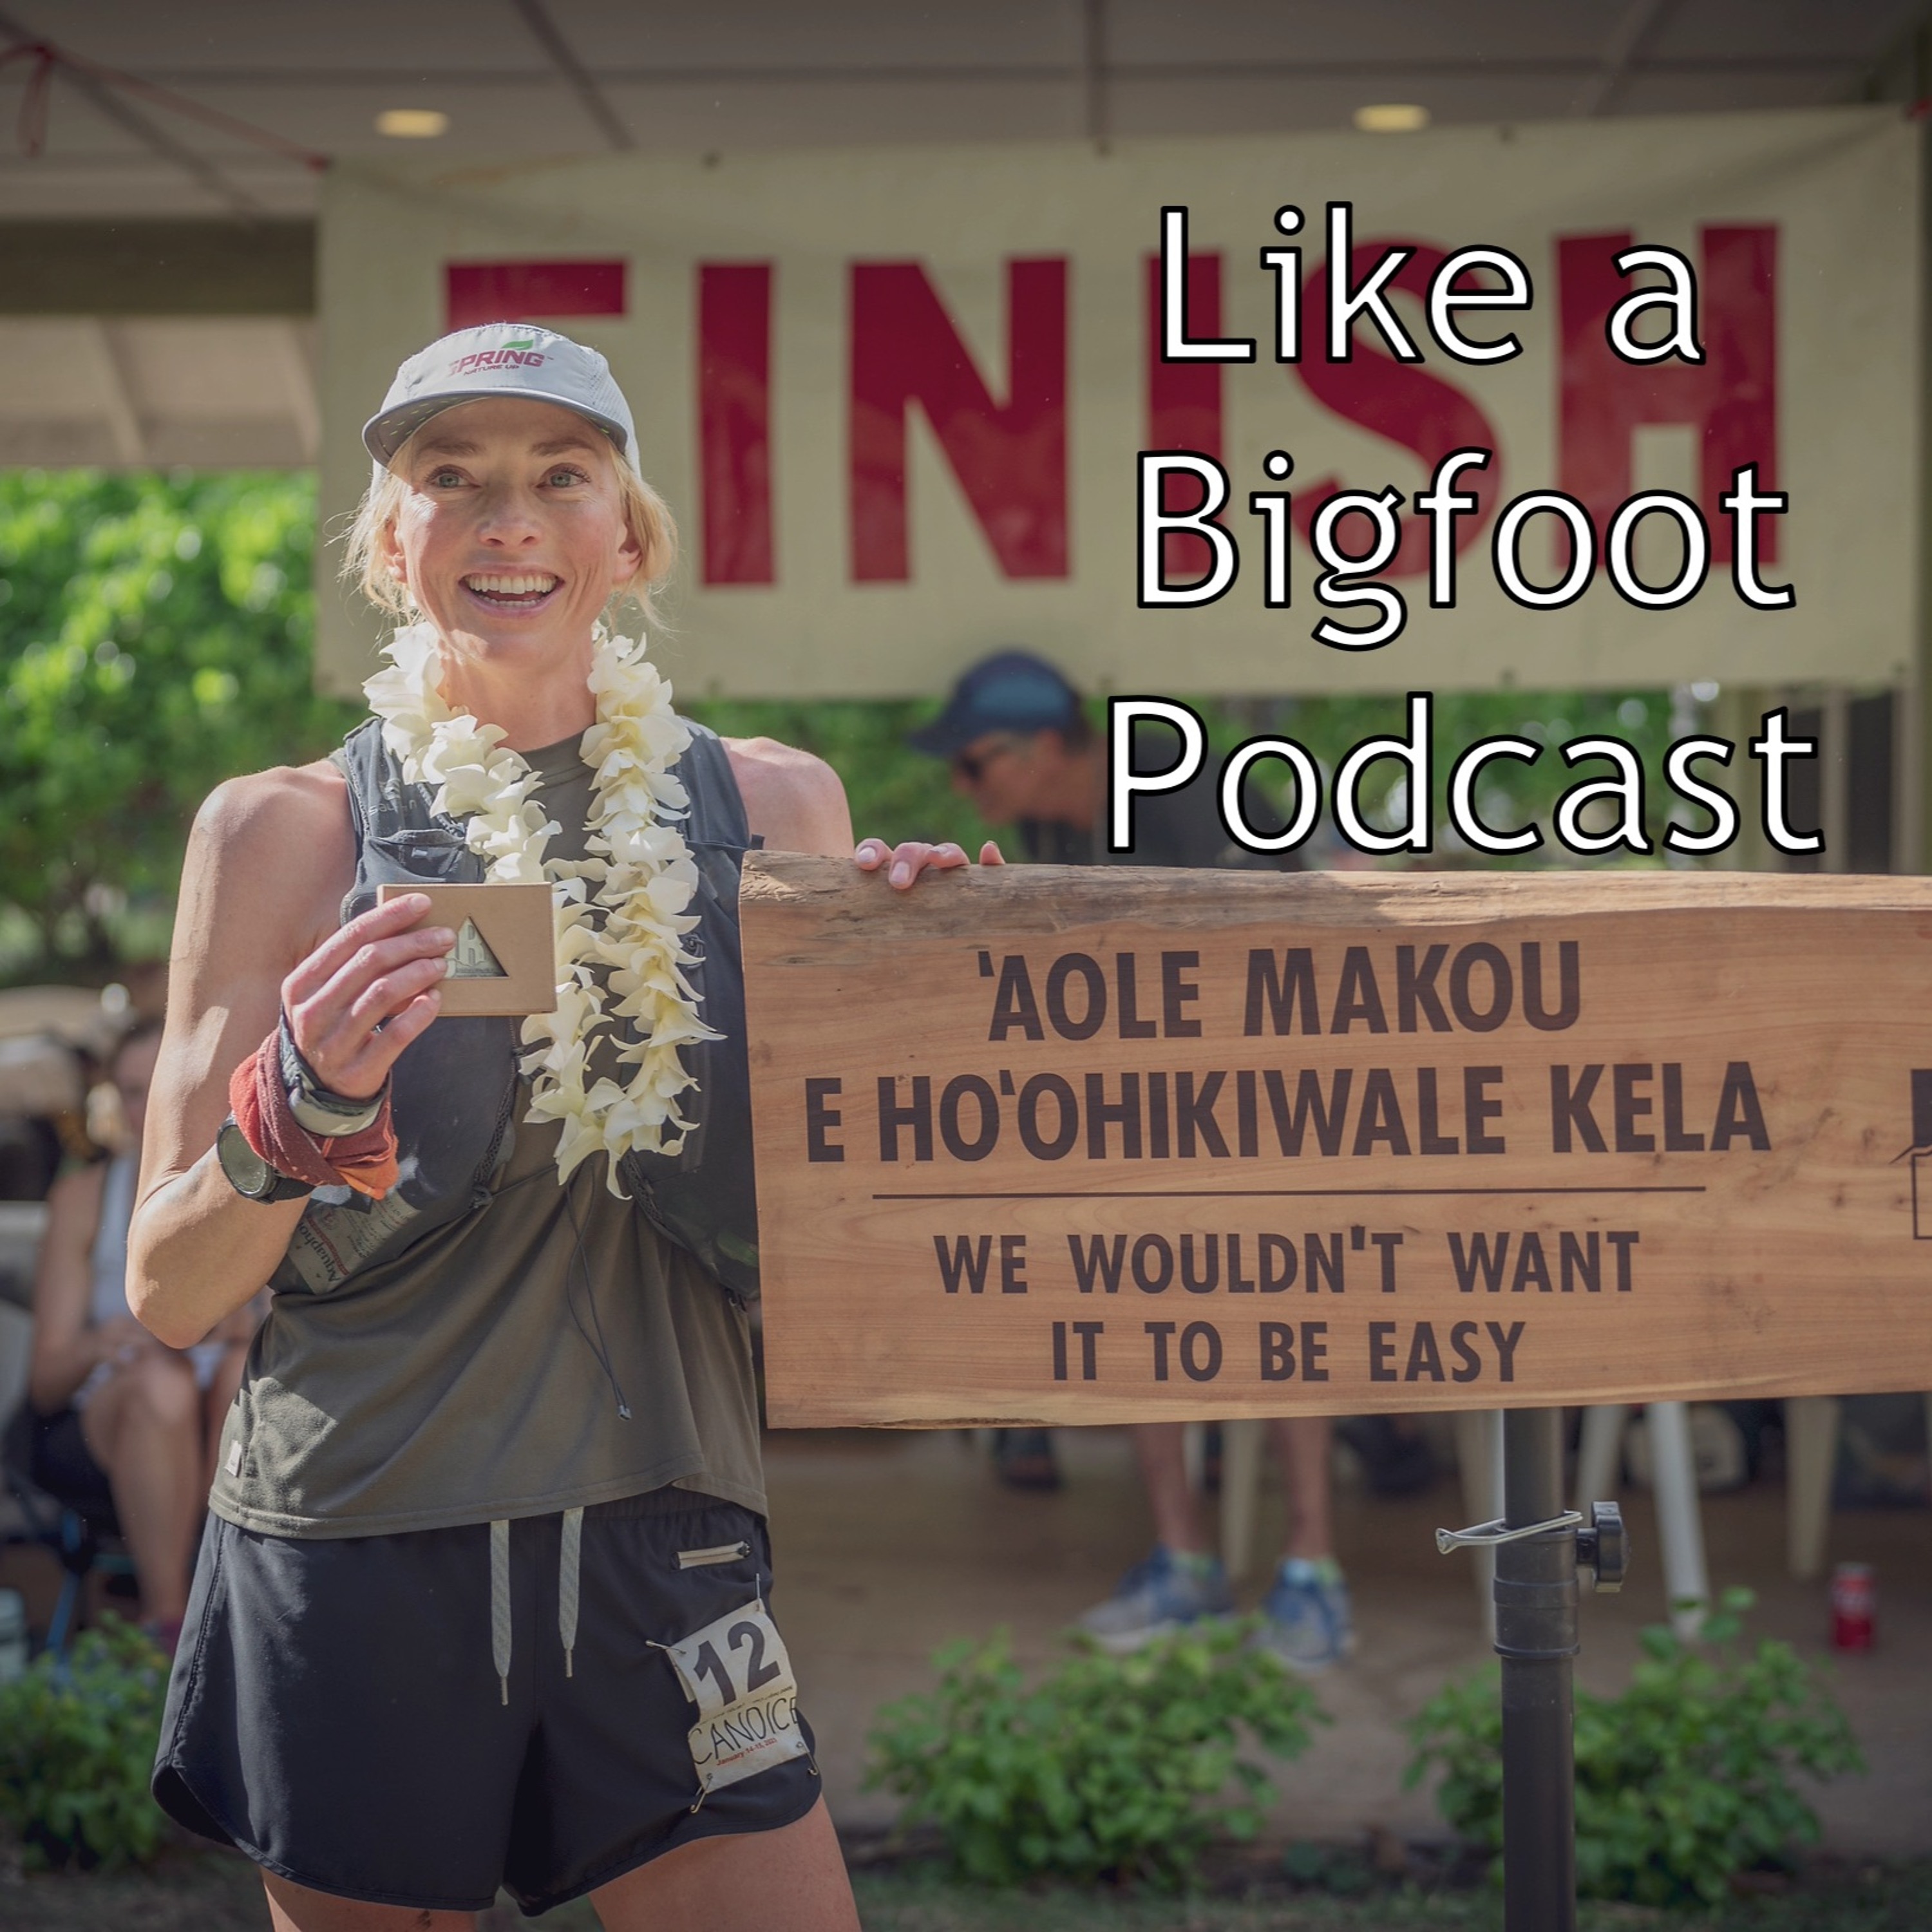 #337: Candice Burt 5 -- 200 Ultras in 200 Days, The Story of This Epic Challenge